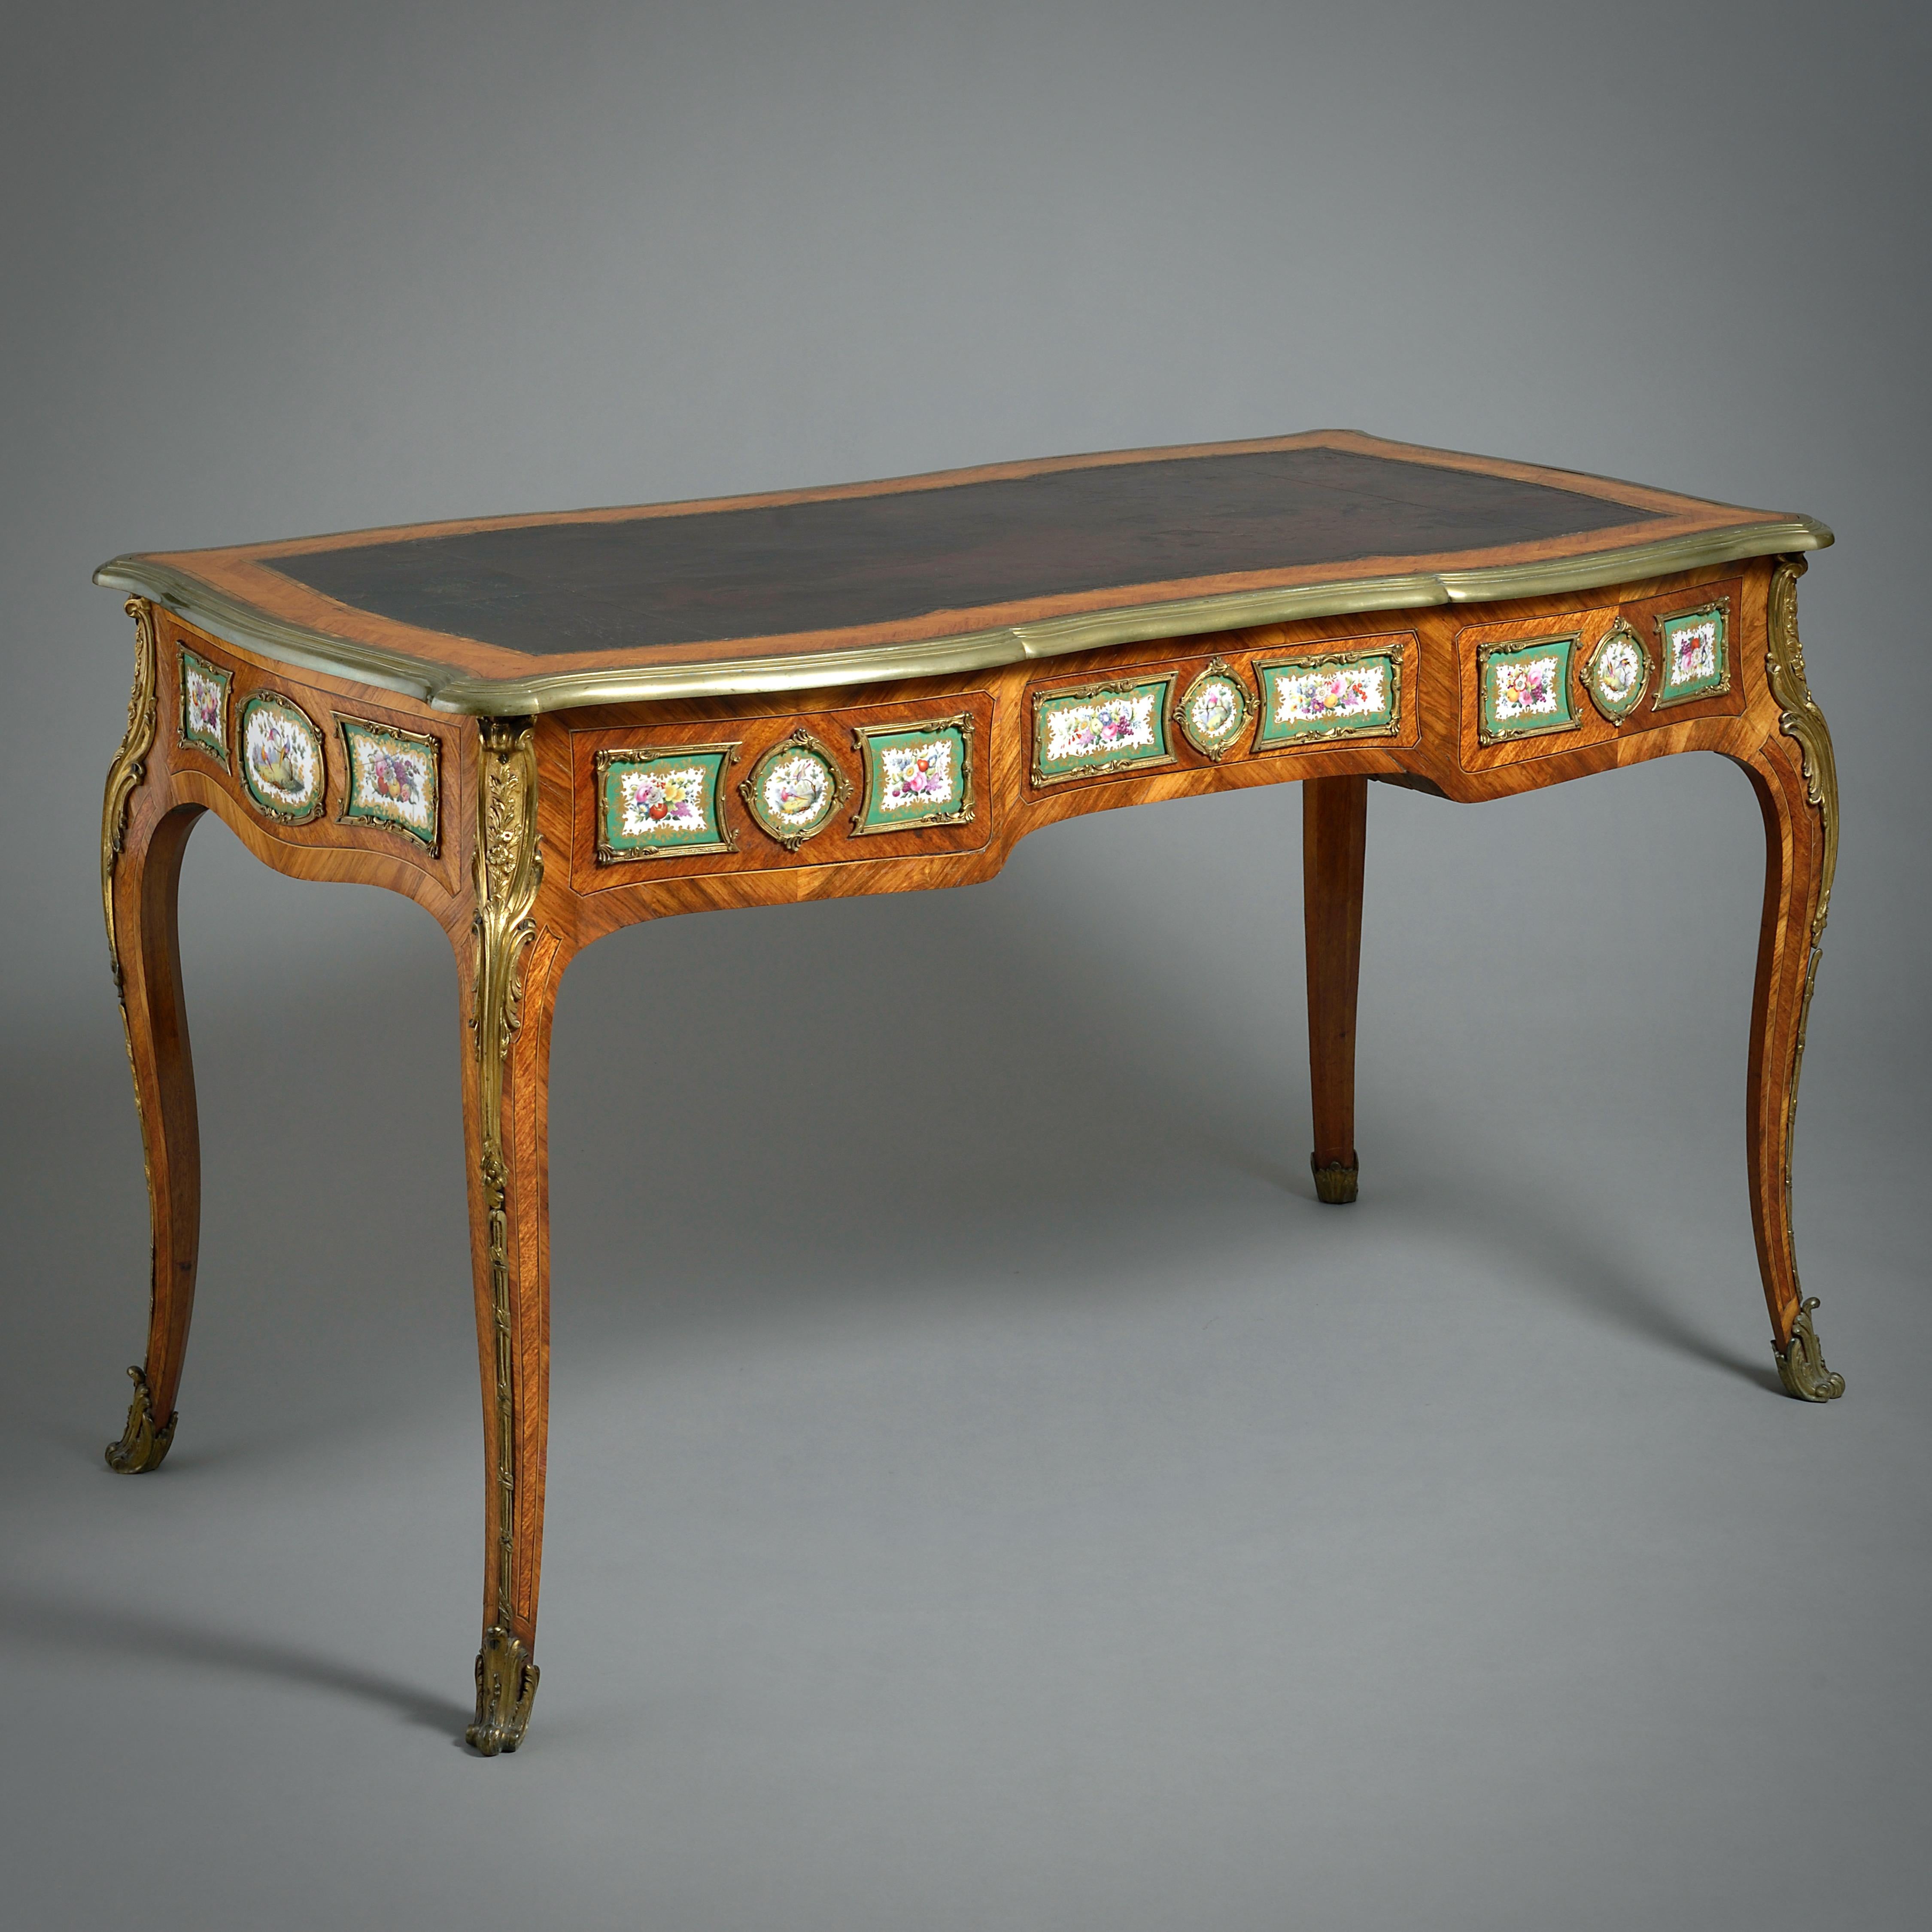 A FINE EARLY VICTORIAN PORCELAIN AND ORMOLU-MOUNTED KINGWOOD BUREAU-PLAT ATTRIBUTED TO EDWARD HOLMES BALDOCK, CIRCA 1840.

The top inset with its original maroon leather. The frieze with three sprung drawers.